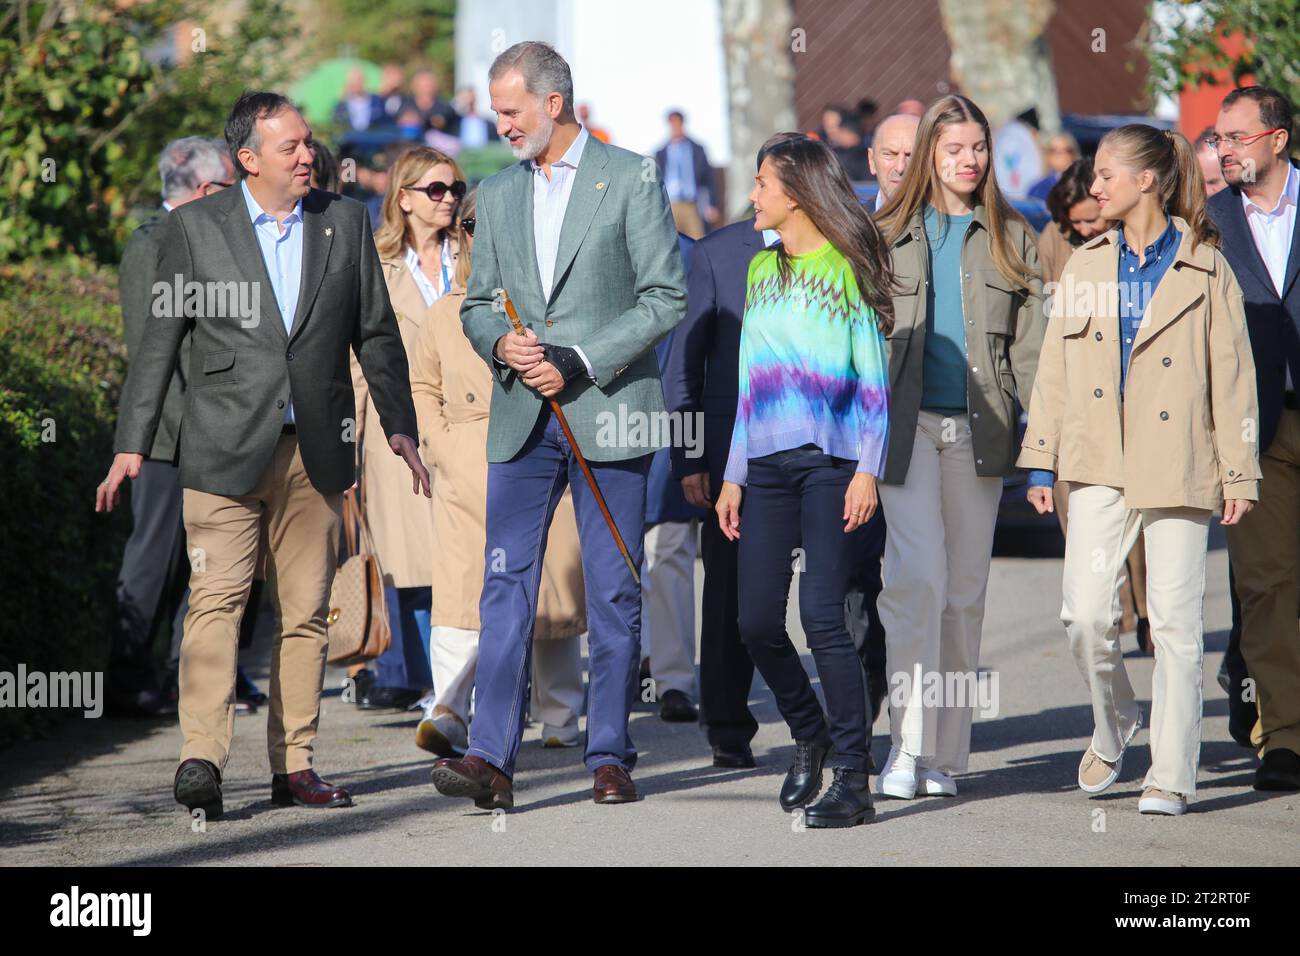 Arroes, Spain, 21st October 2023: The Royal Family moves alongside the mayor of Villaviciosa, Alejandro Vega (L) during the Exemplary Town of Asturias 2023 Award, on October 21, 2023, in Arroes, Spain. Credit: Alberto Brevers / Alamy Live News. Stock Photo